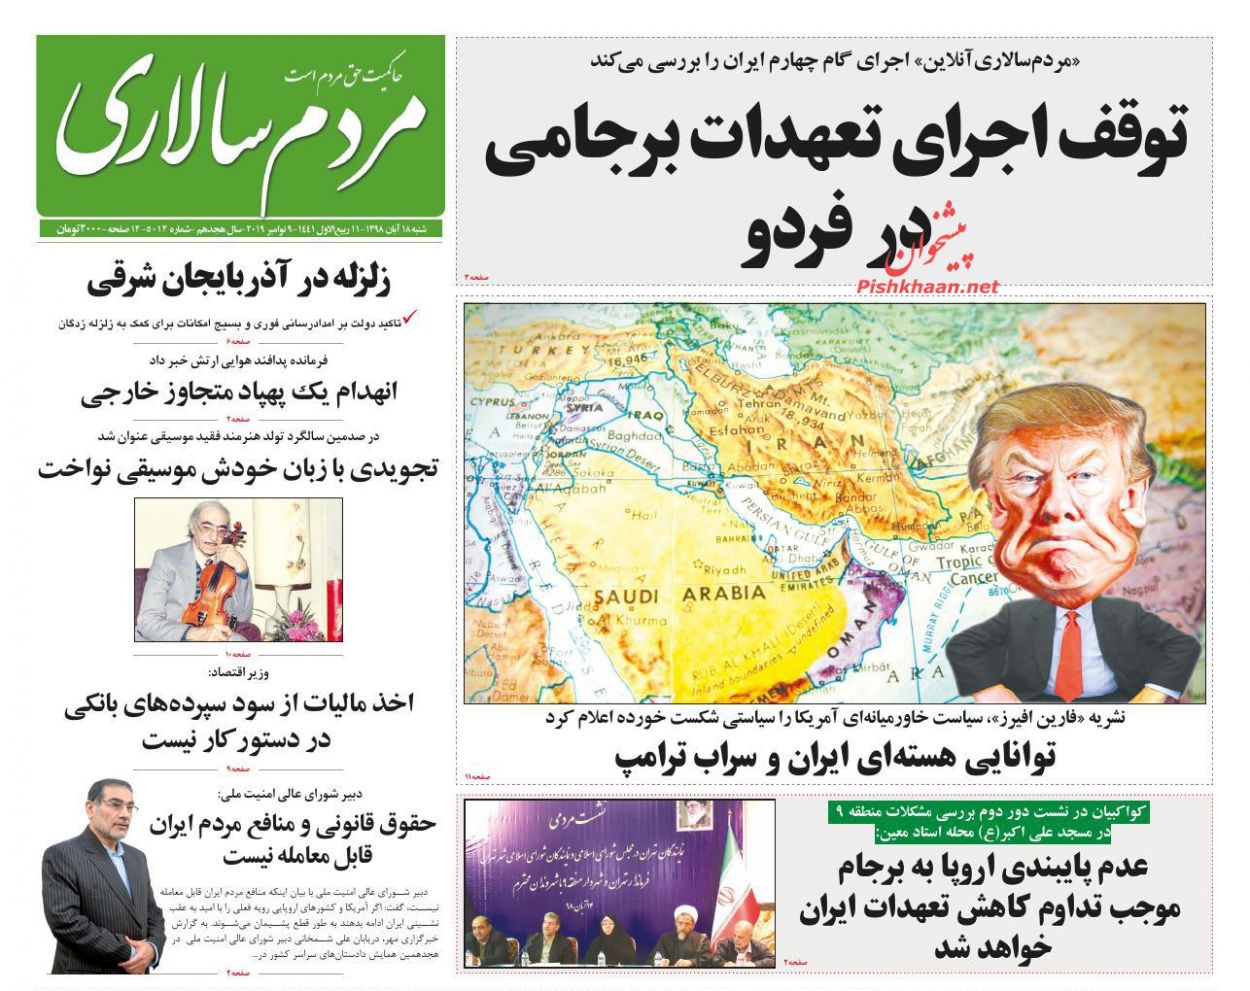 A Look at Iranian Newspaper Front Pages on November 9